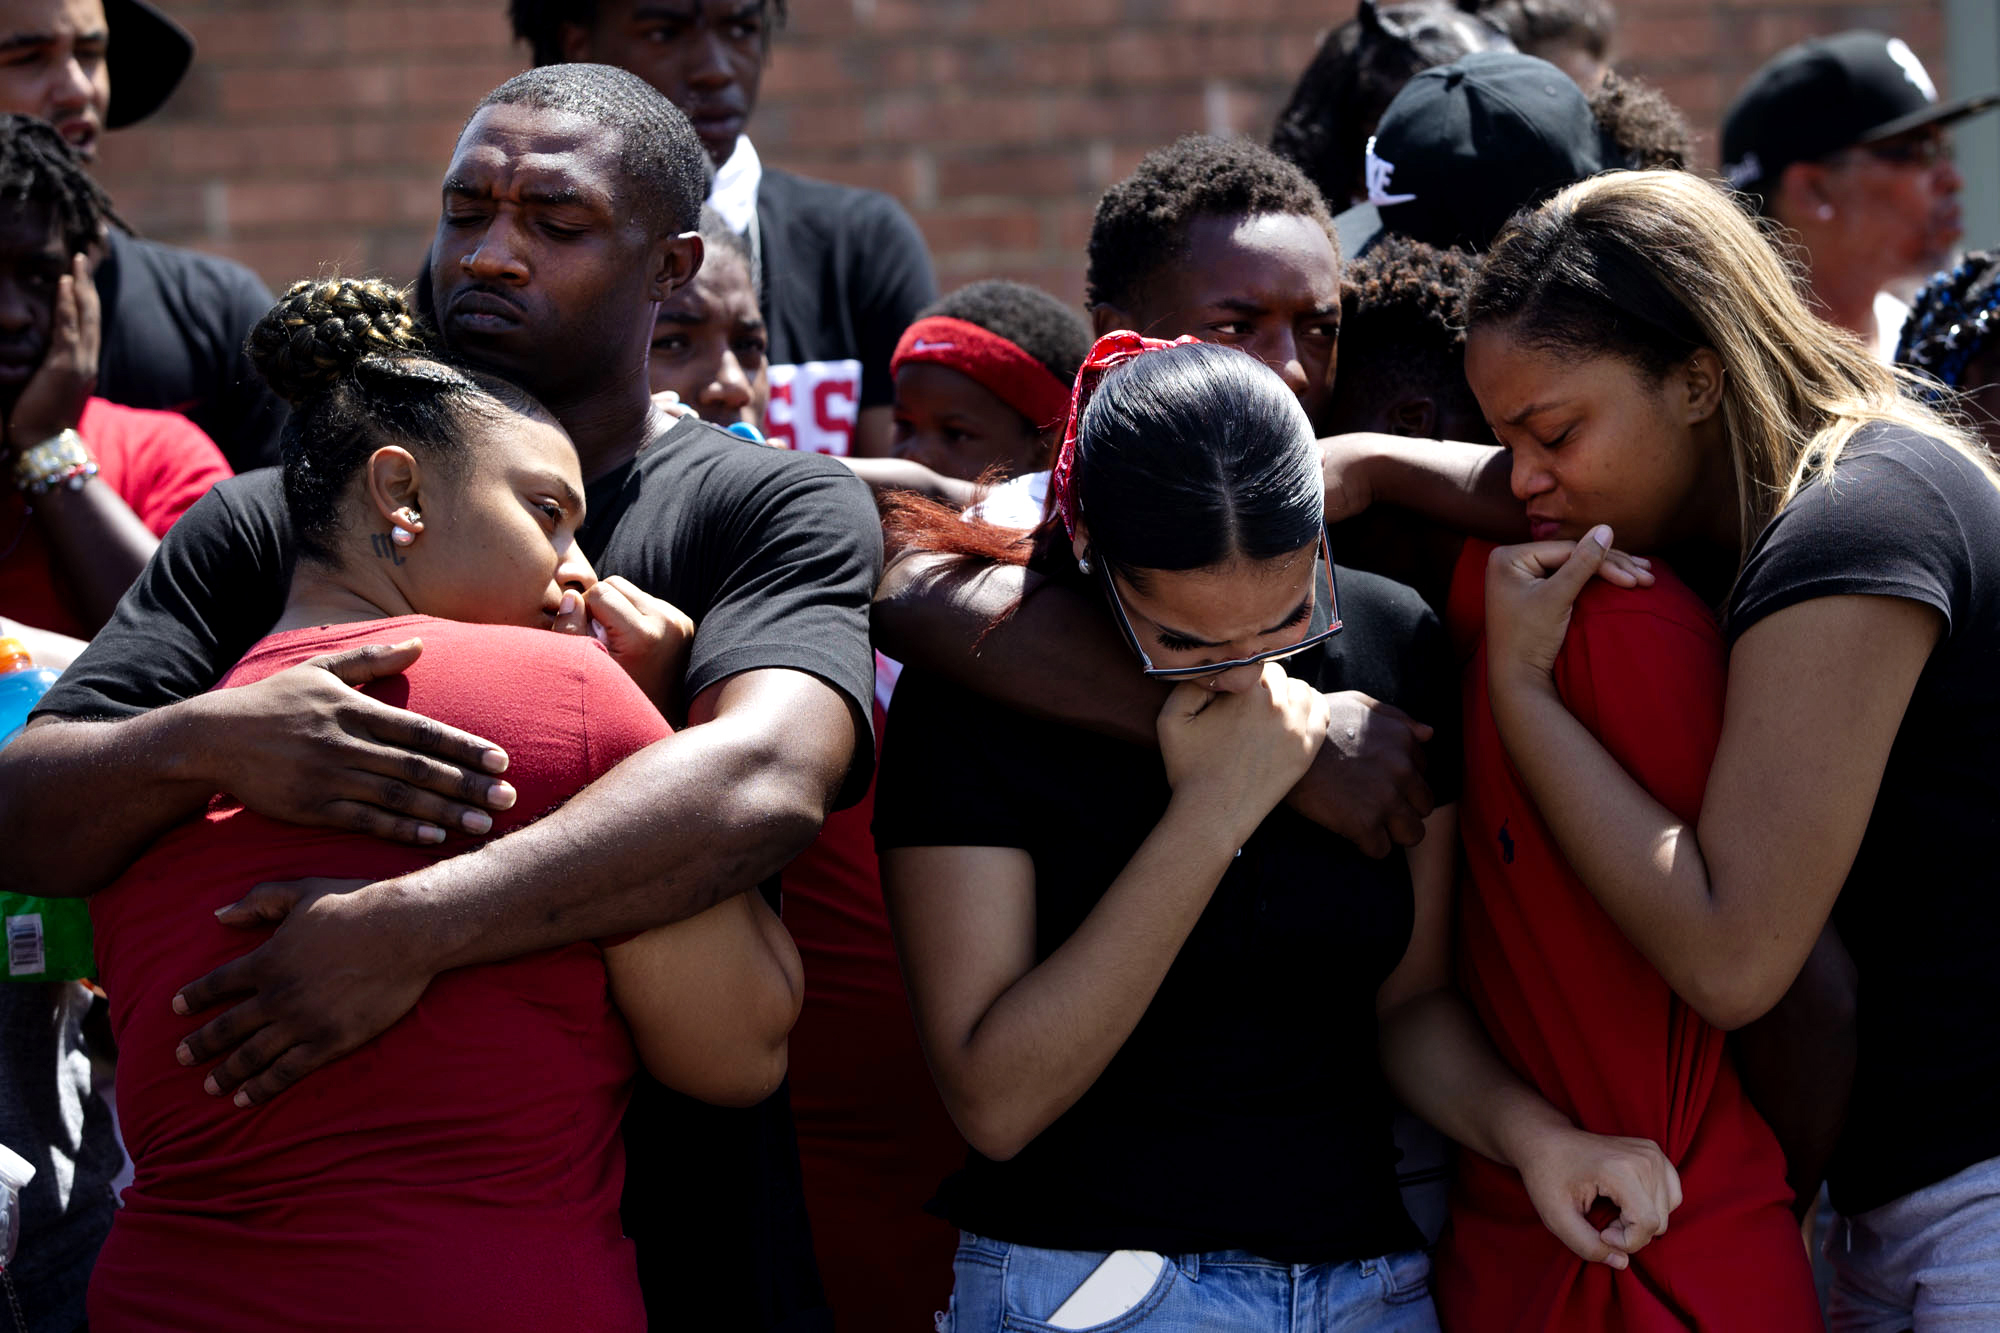  Friends and family members of Devonte Ortiz gather on Friday, July 6, 2018, at Pleasant Hills Apartments in Austin, Texas. Witnesses say Ortiz’ neighbor Jason Roche fatally shot 19-year-old Ortiz in the early hours of July 4 in a dispute about firew